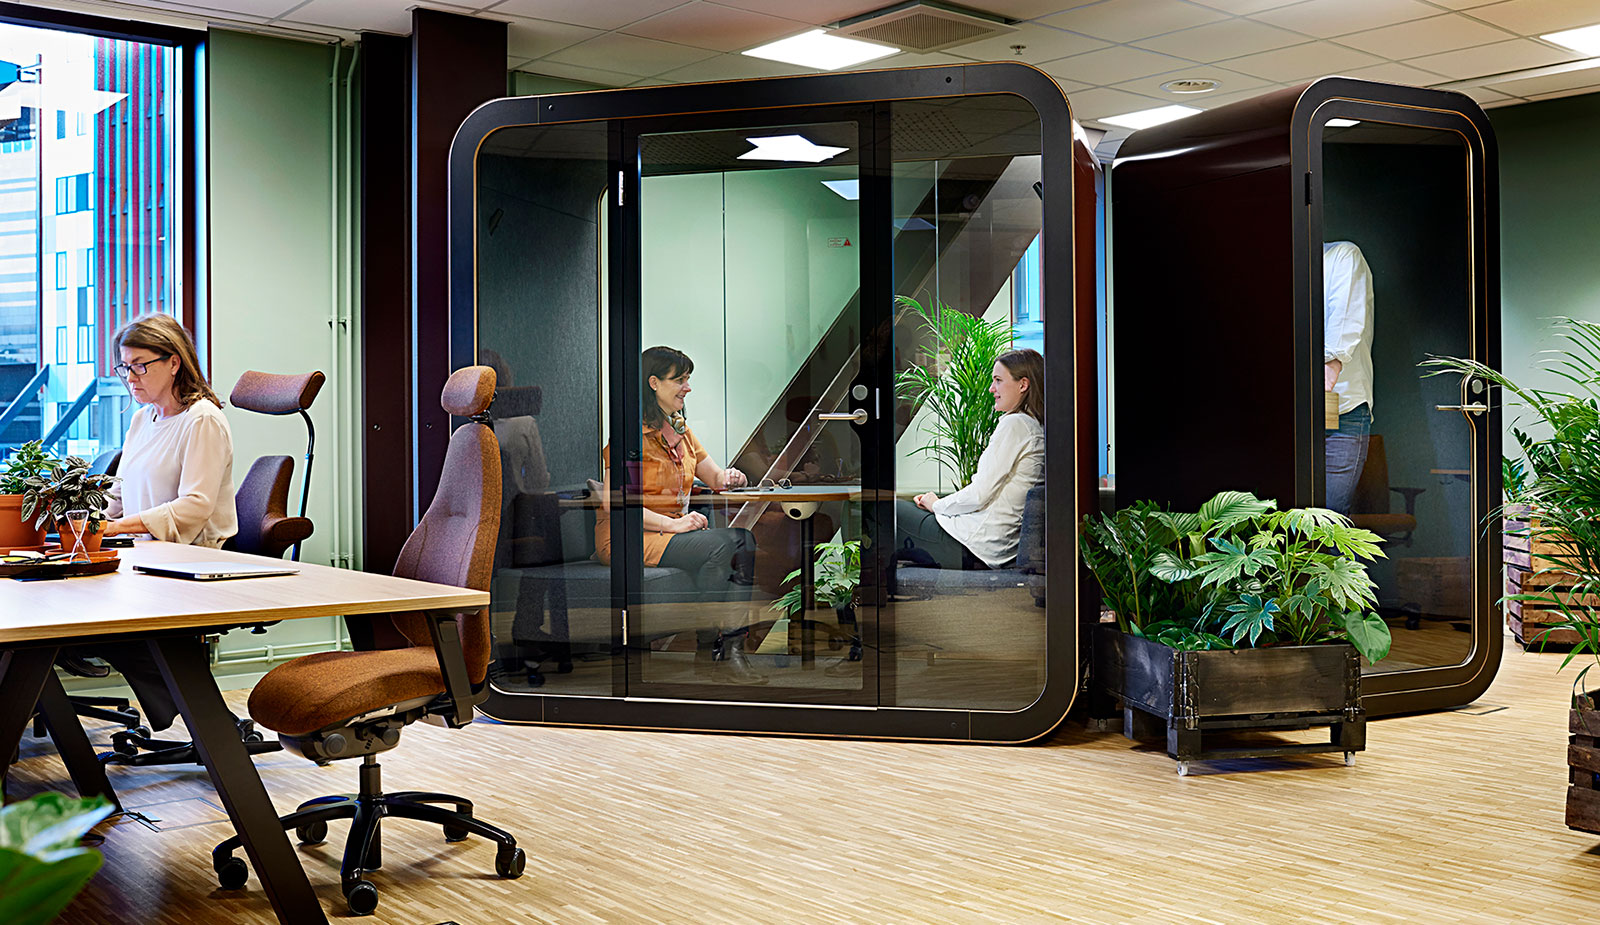 2 people inside a glass meeting booth in coworking office pop in work in sweden